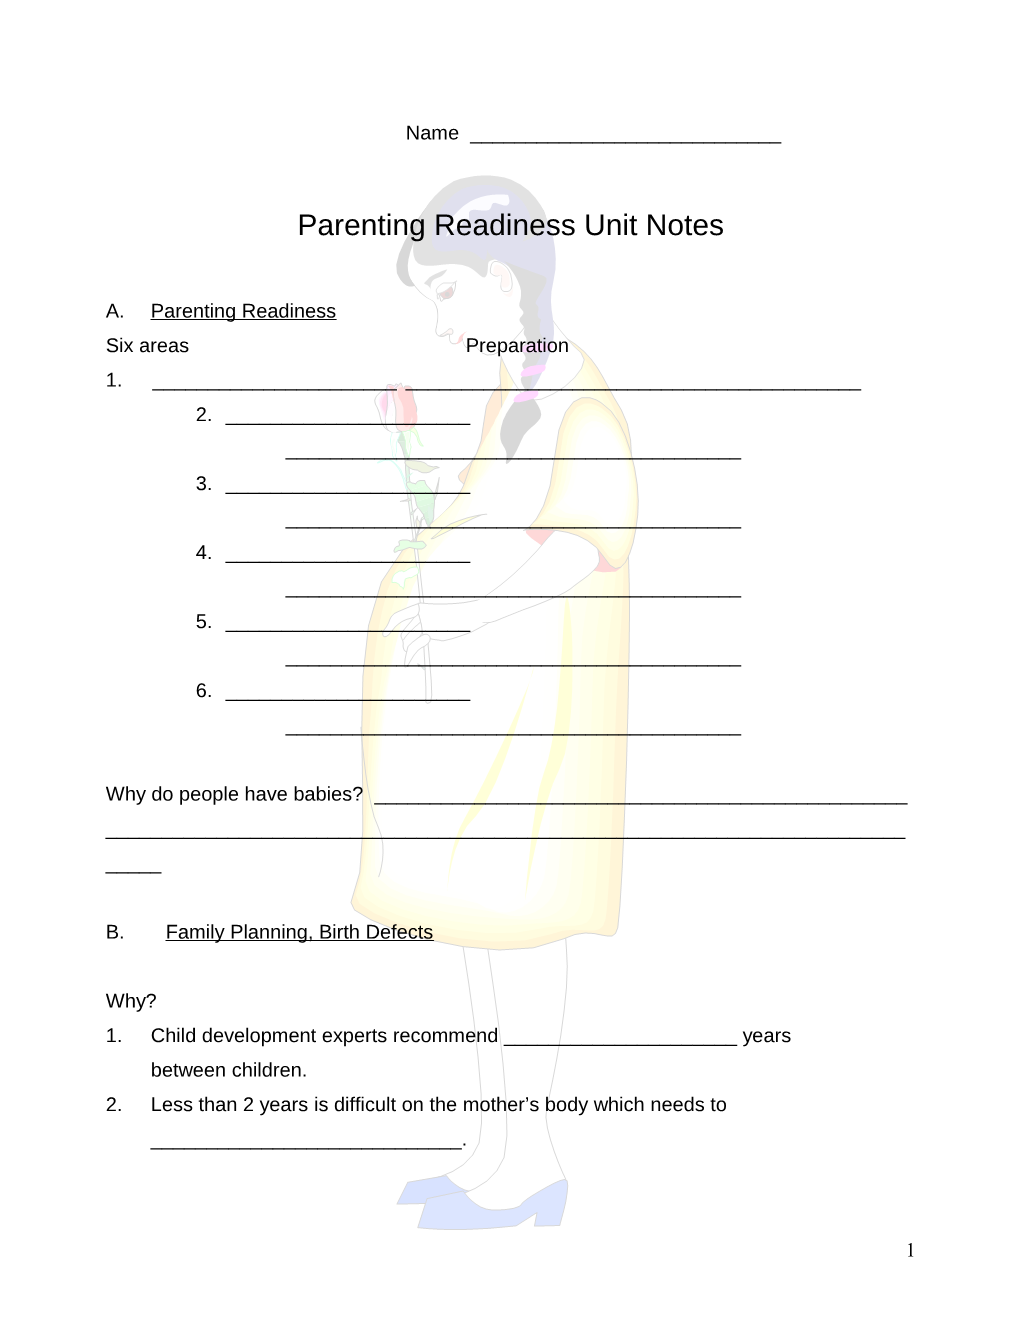 Parenting Readiness Unit Notes